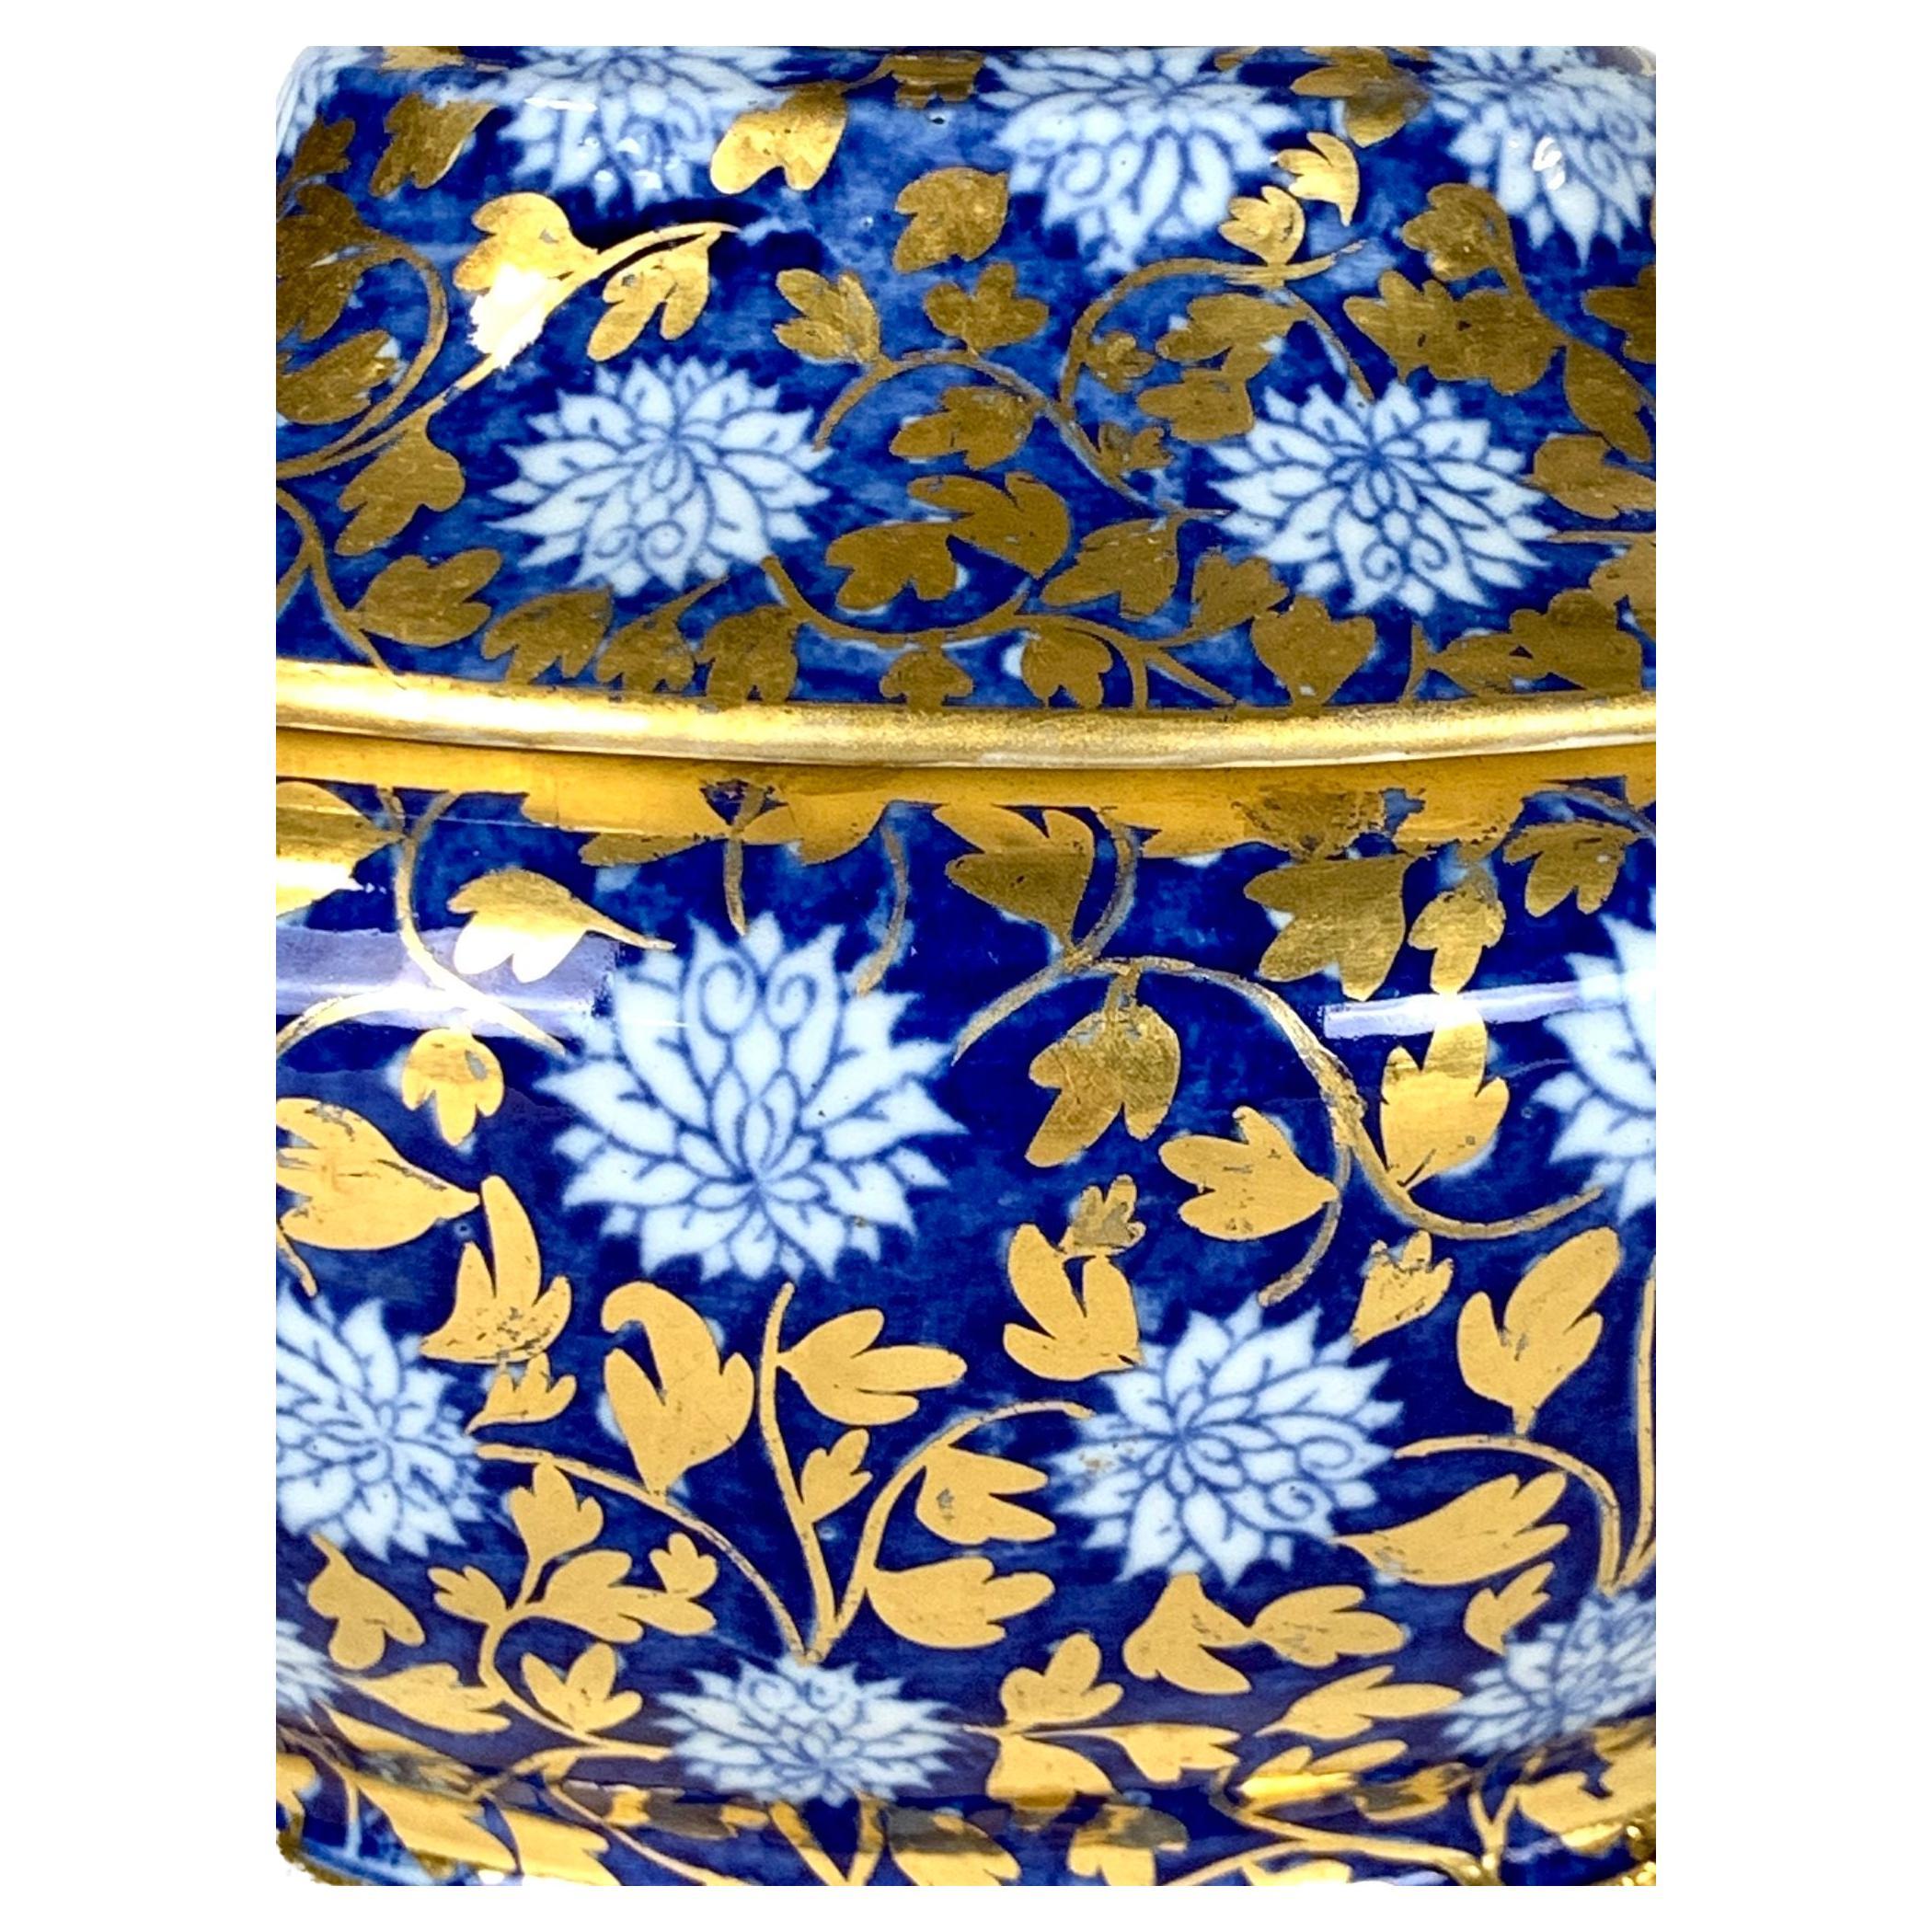 This hand painted porcelain dessert service features the exquisite Blue Chrysanthemum pattern, combining deep blue with the allure of gold.
It's a fabulous combination!
The golden chrysanthemum leaves are richly gilded, creating a beautiful contrast